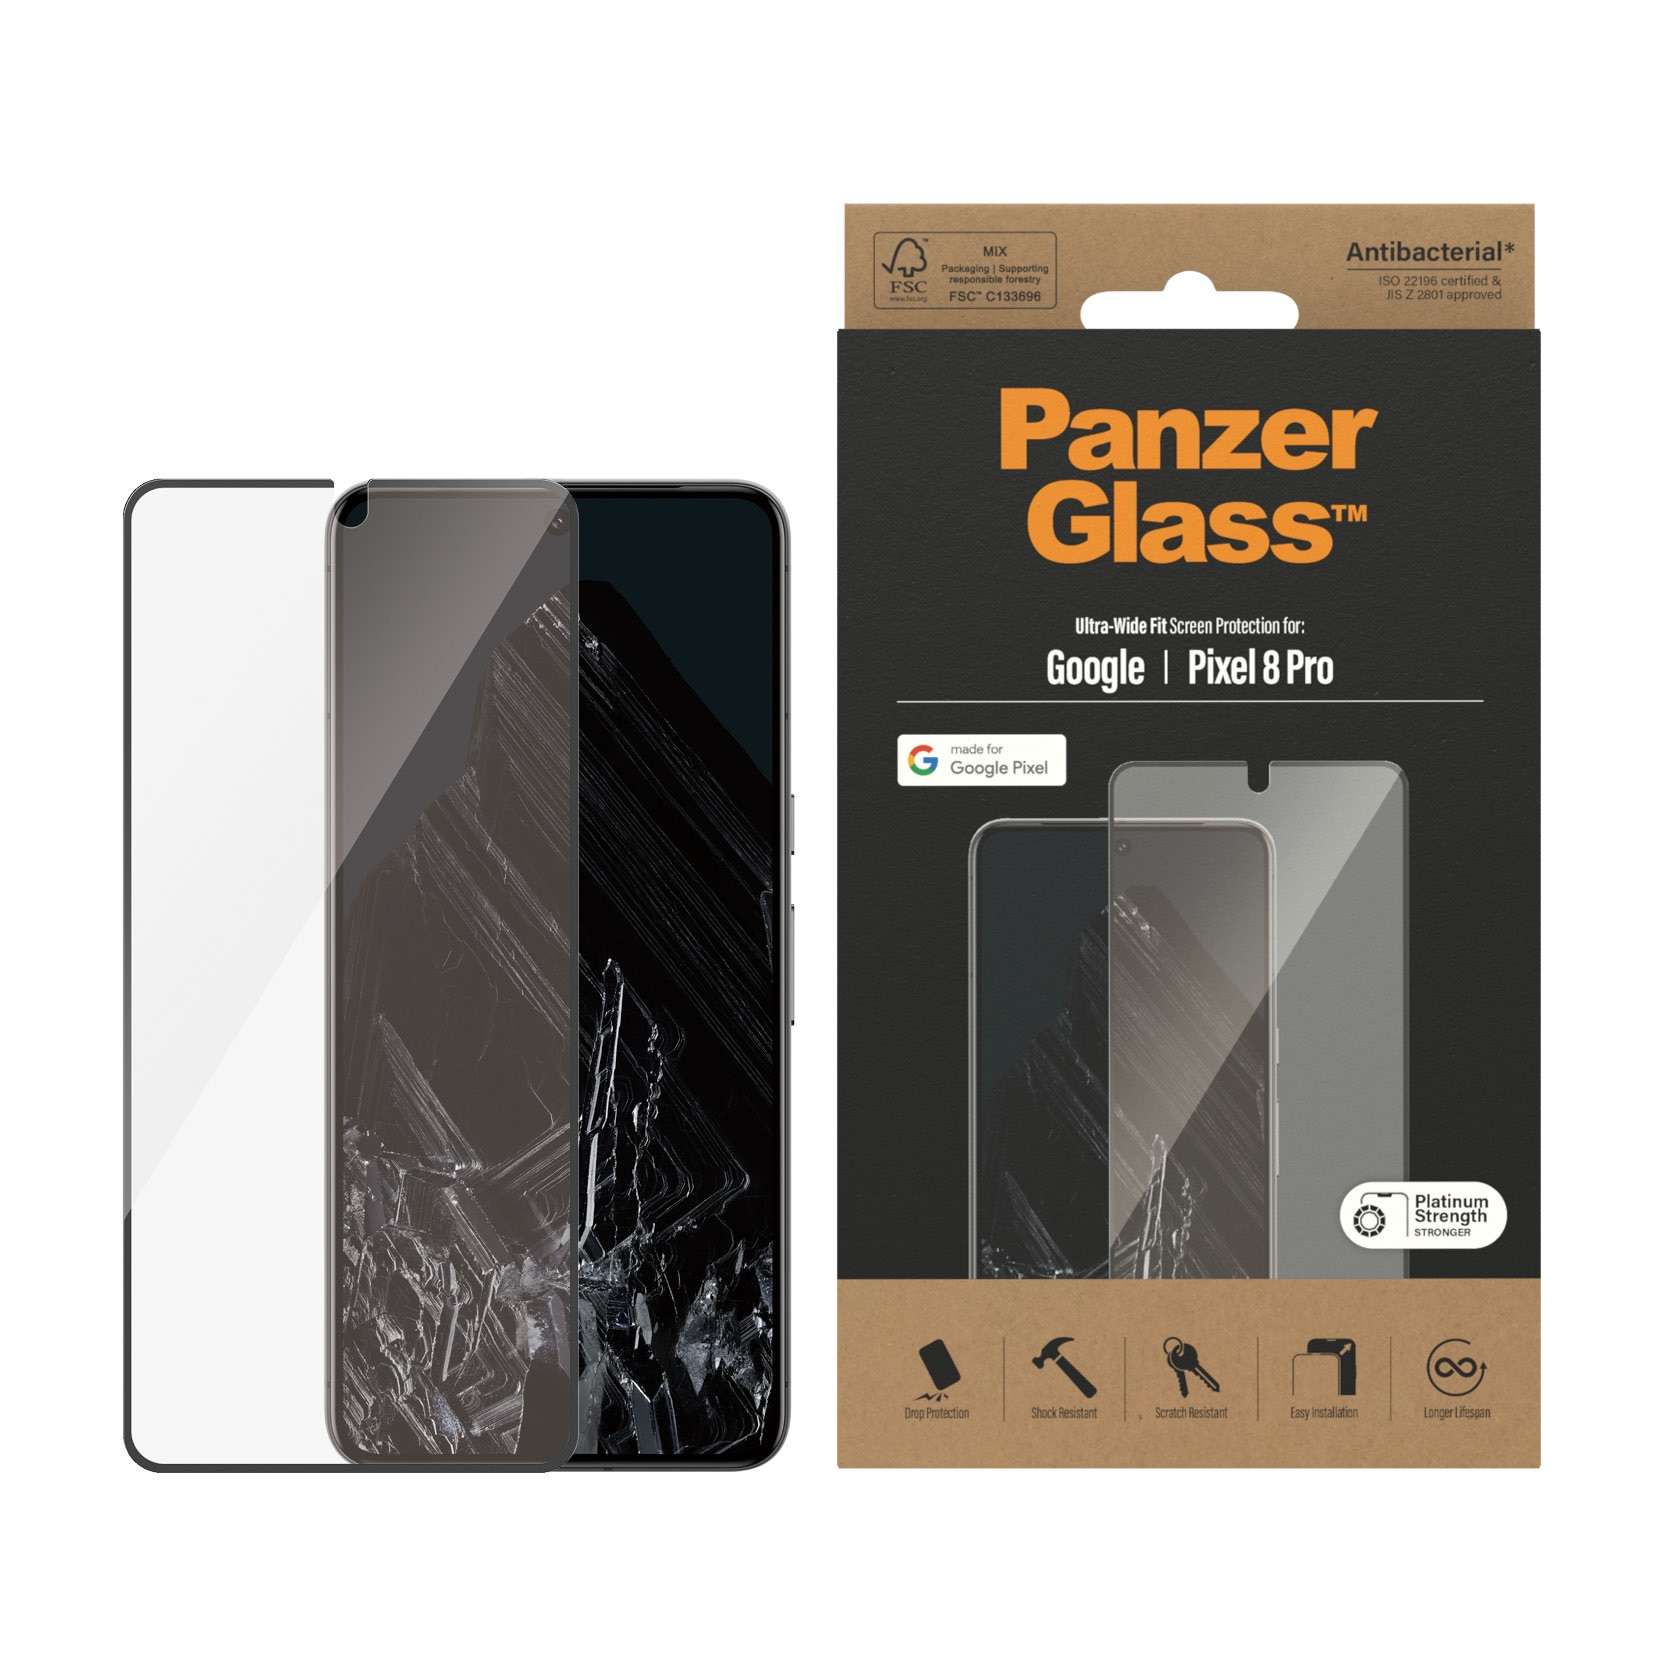 Google Pixel 8 Pro Screen Protector Ultra Wide Fit